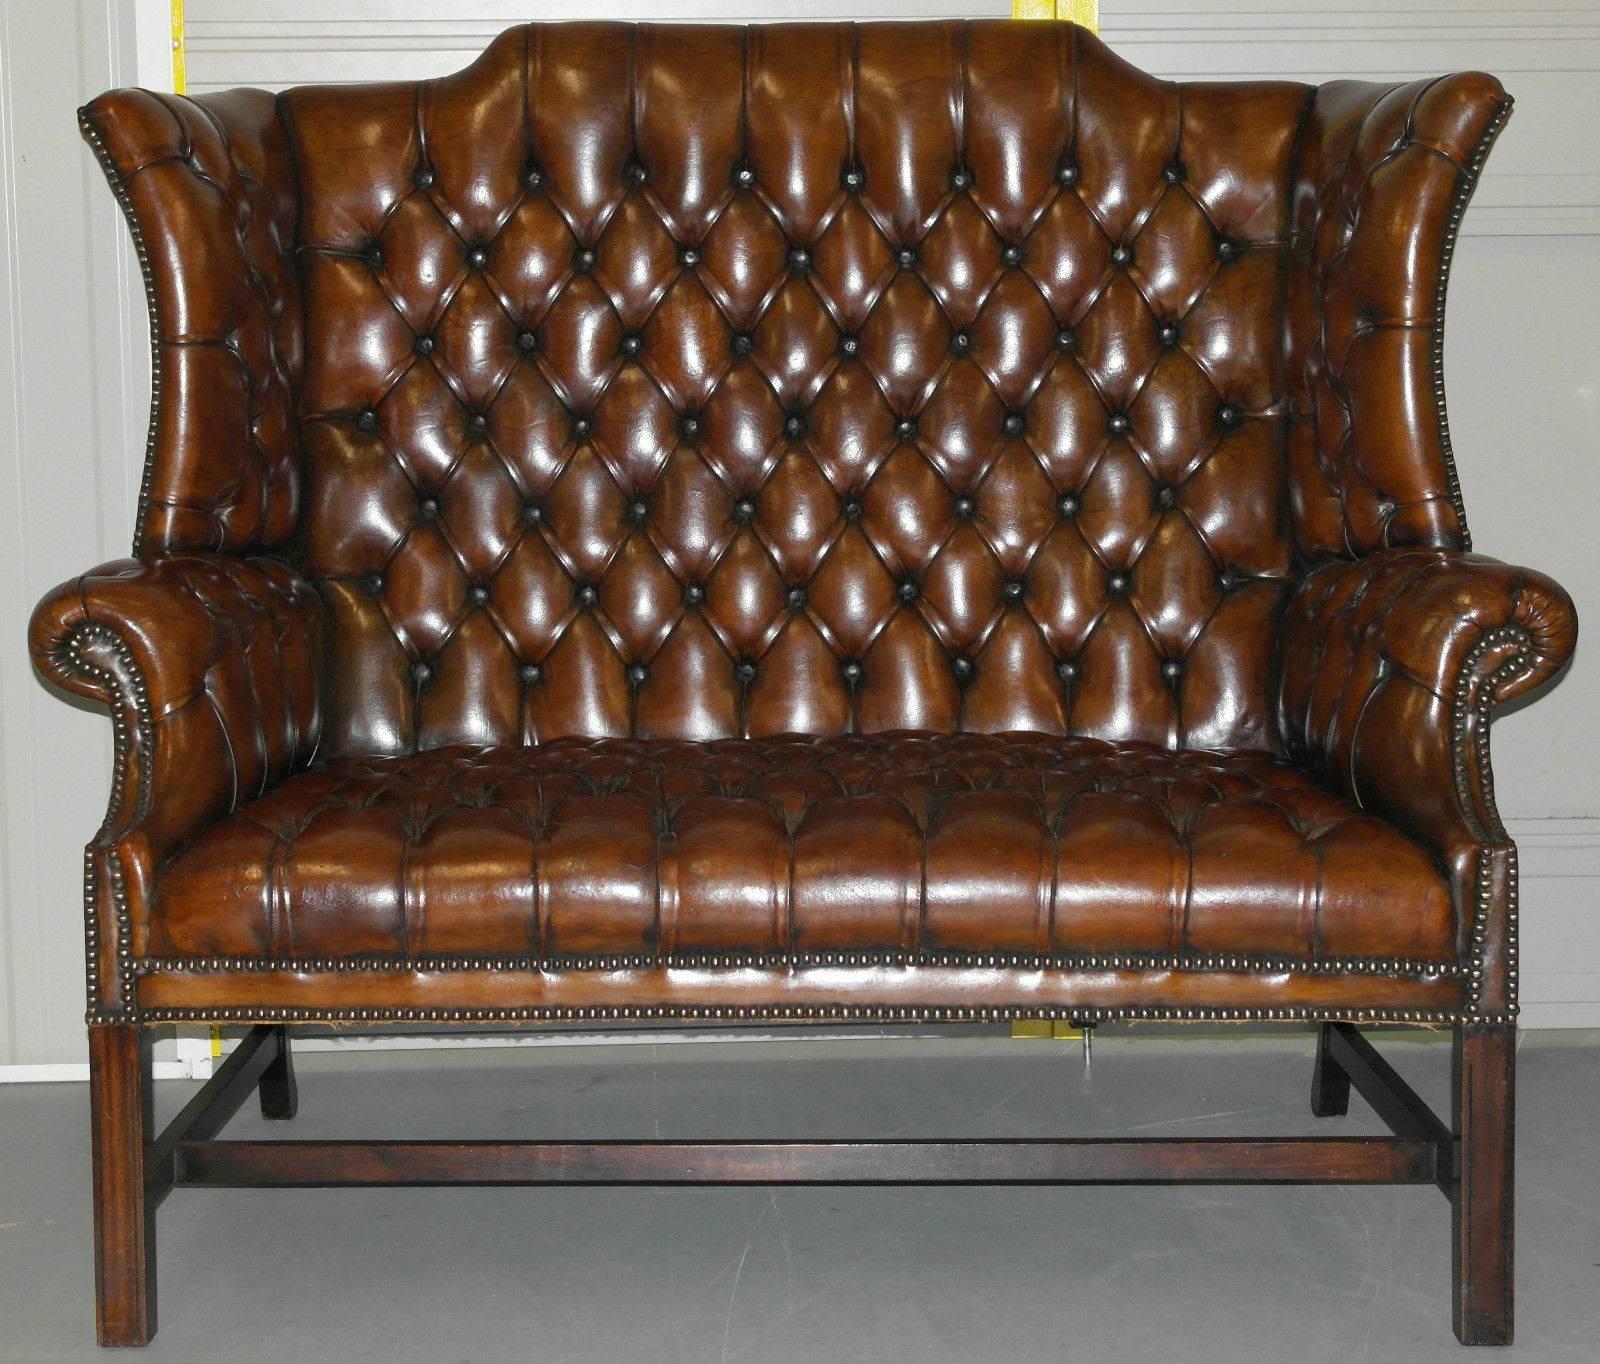 Item For Sale

Wimbledon-Furniture is delighted to offer for auction this extremely rare Chesterfield George III style wingback bench sofa upholstered with hand-dyed leather 

This piece has been extensively and sympathetically restored, the